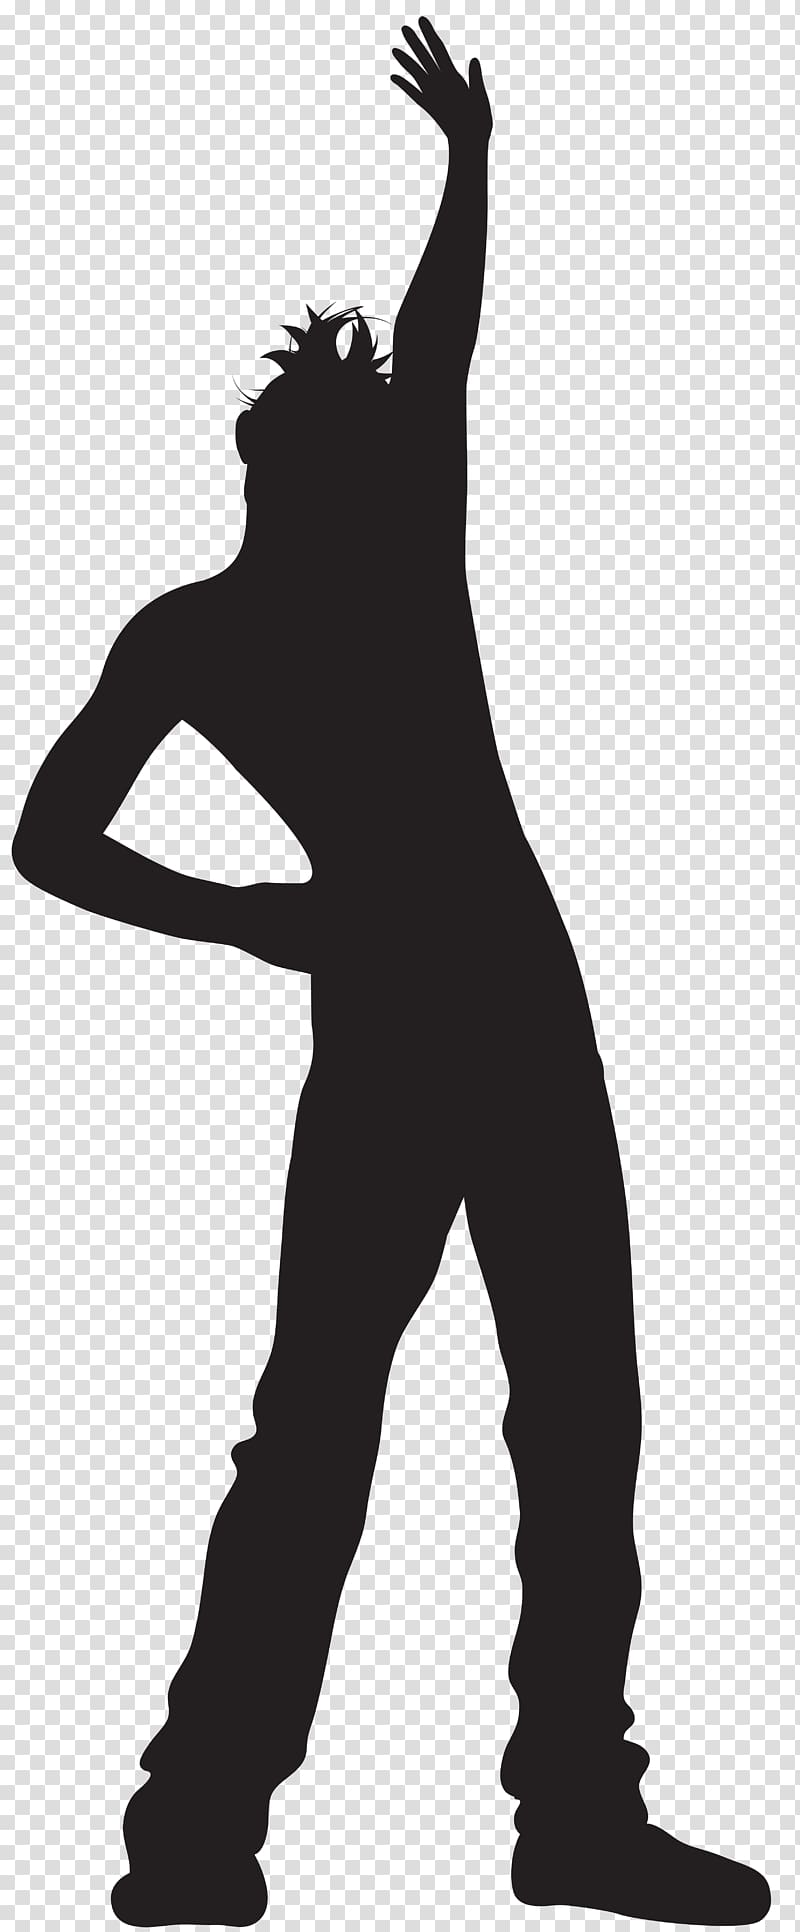 silhouette of man ], Silhouette Dance , Dancing Man Silhouette transparent background PNG clipart